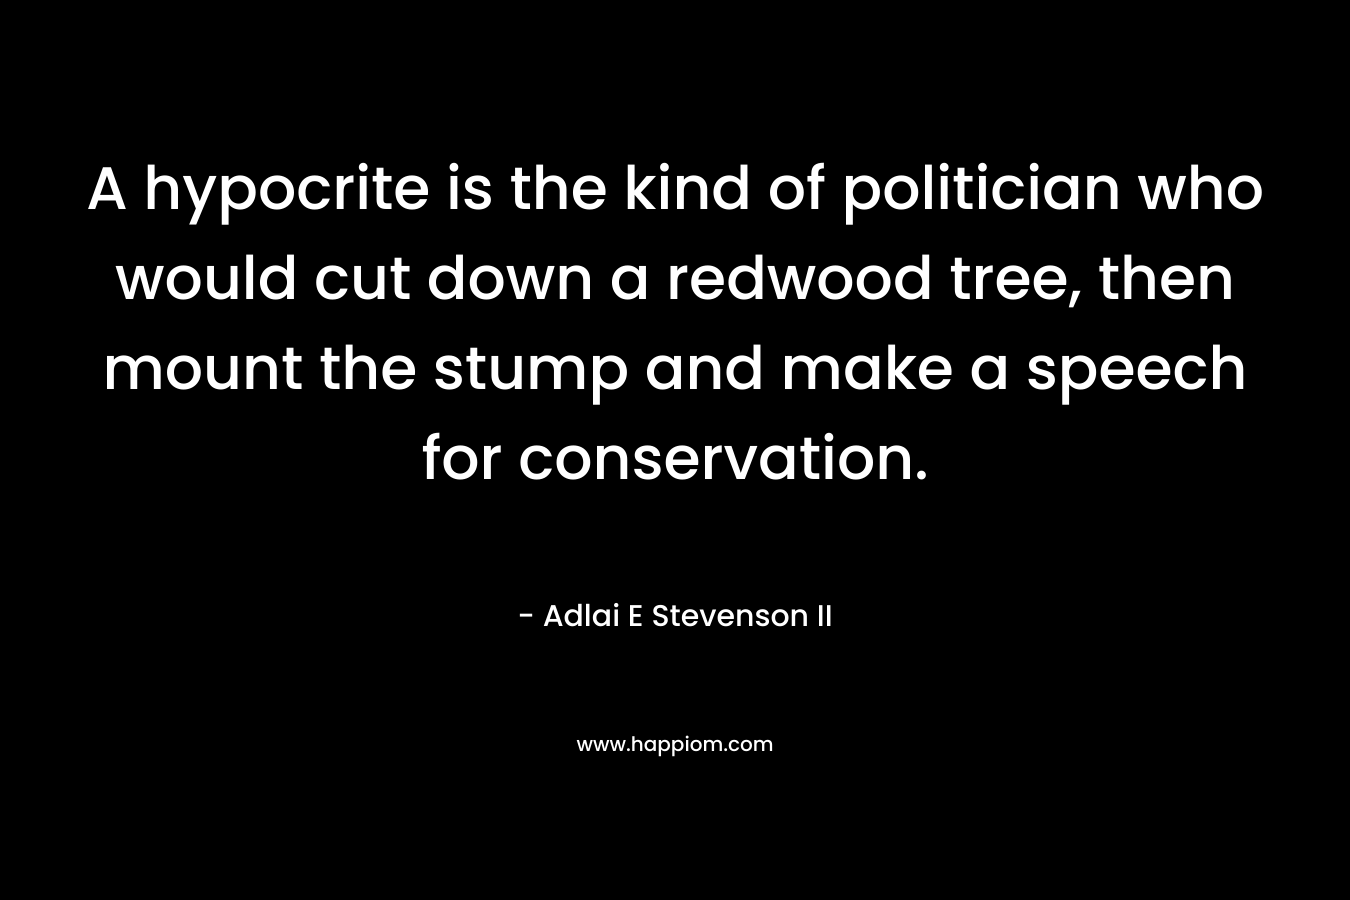 A hypocrite is the kind of politician who would cut down a redwood tree, then mount the stump and make a speech for conservation. – Adlai E Stevenson II